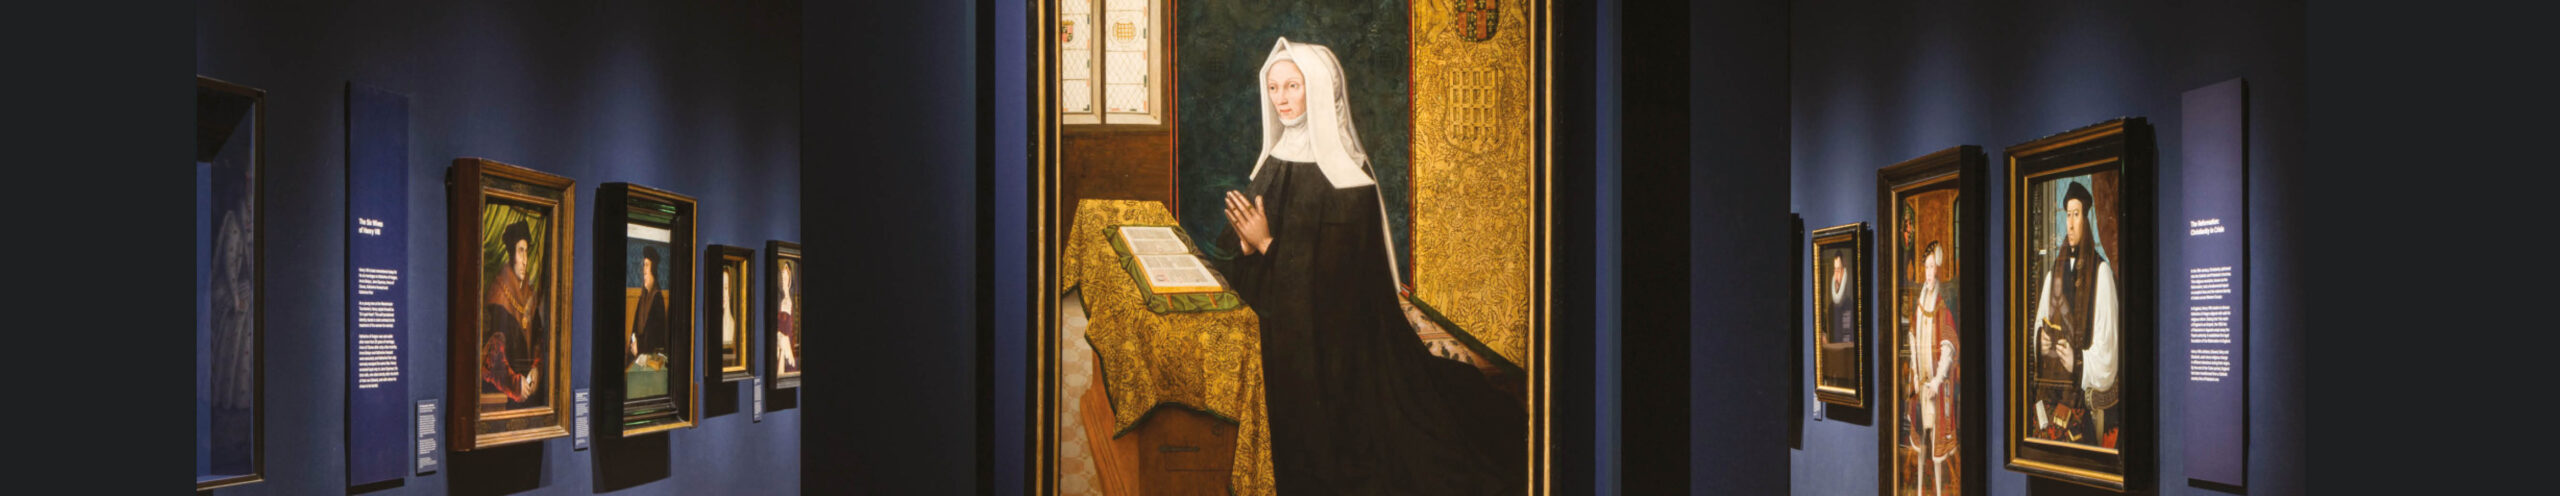 Lady Margaret Beaufort at the National Portrait Gallery